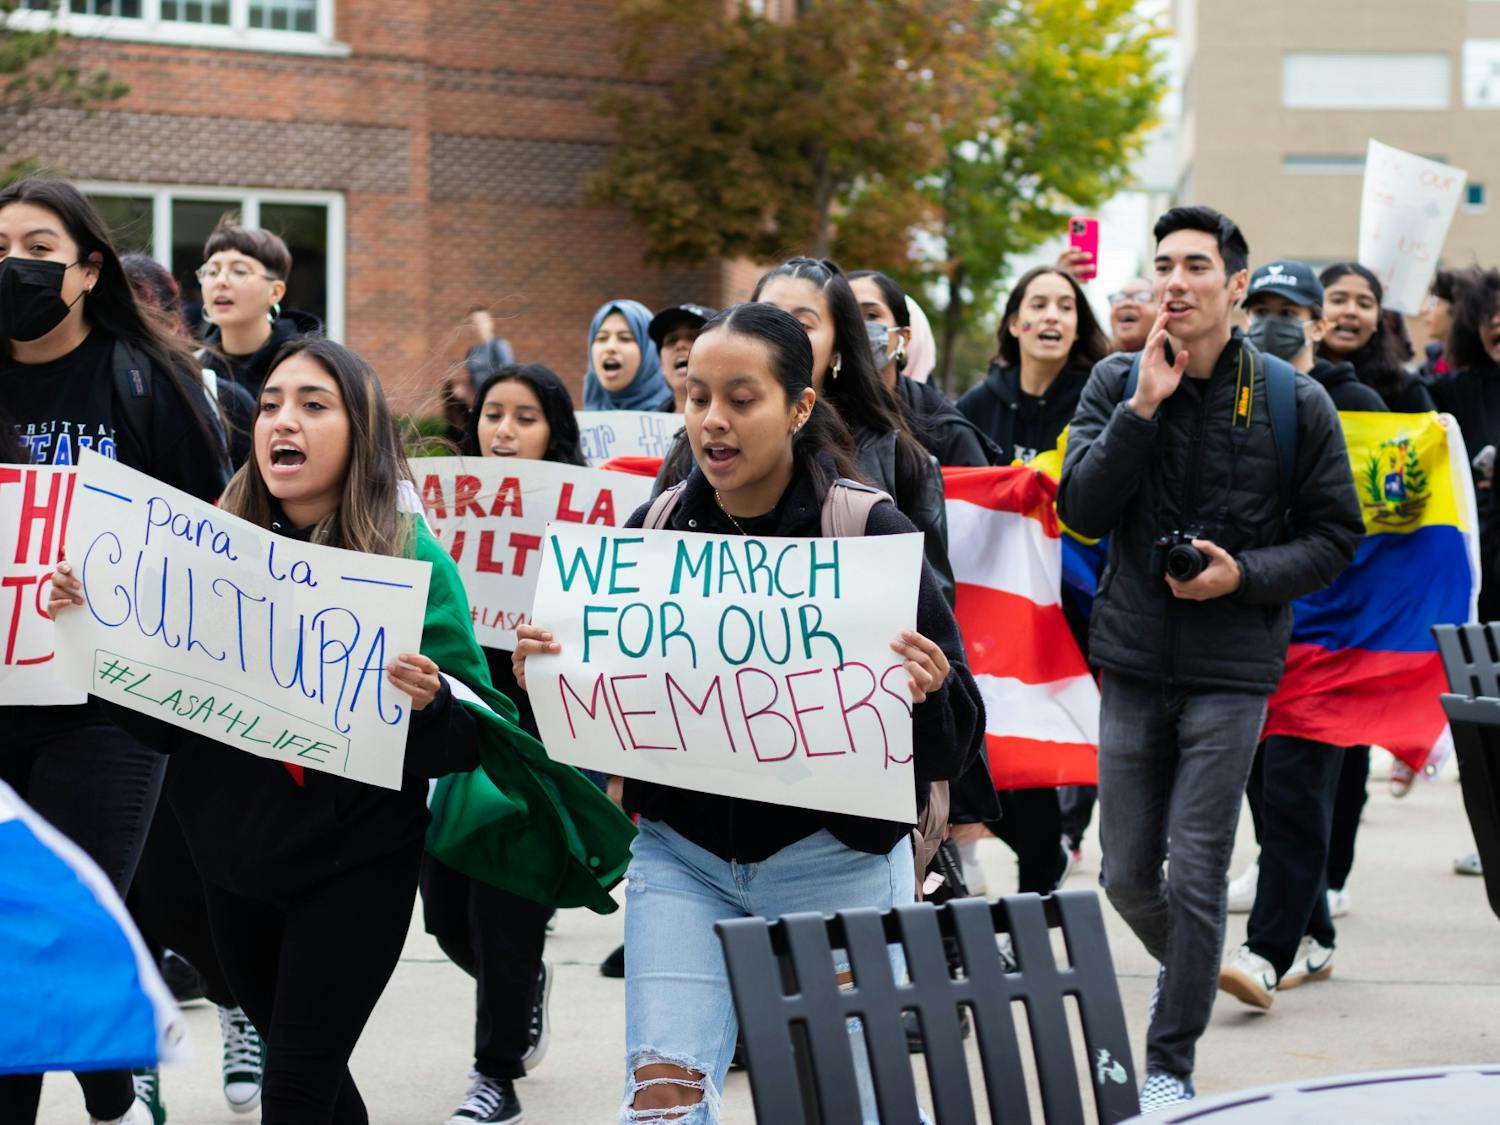 LASA members protested SA policies that limited non-undergraduate student tickets to club events